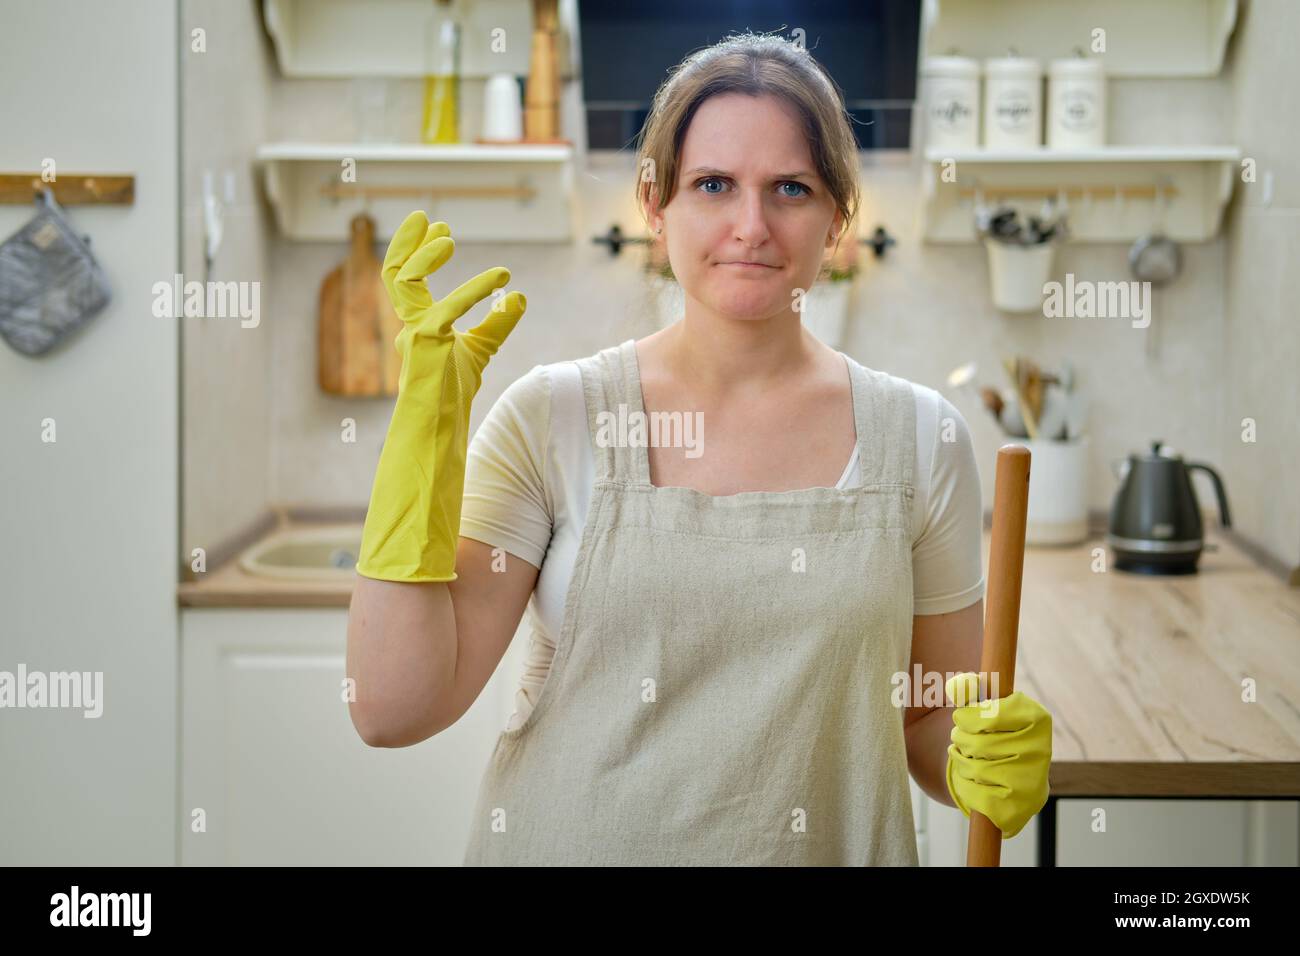 Angry woman glares at the camera while cleaning in the home kitchen Stock Photo